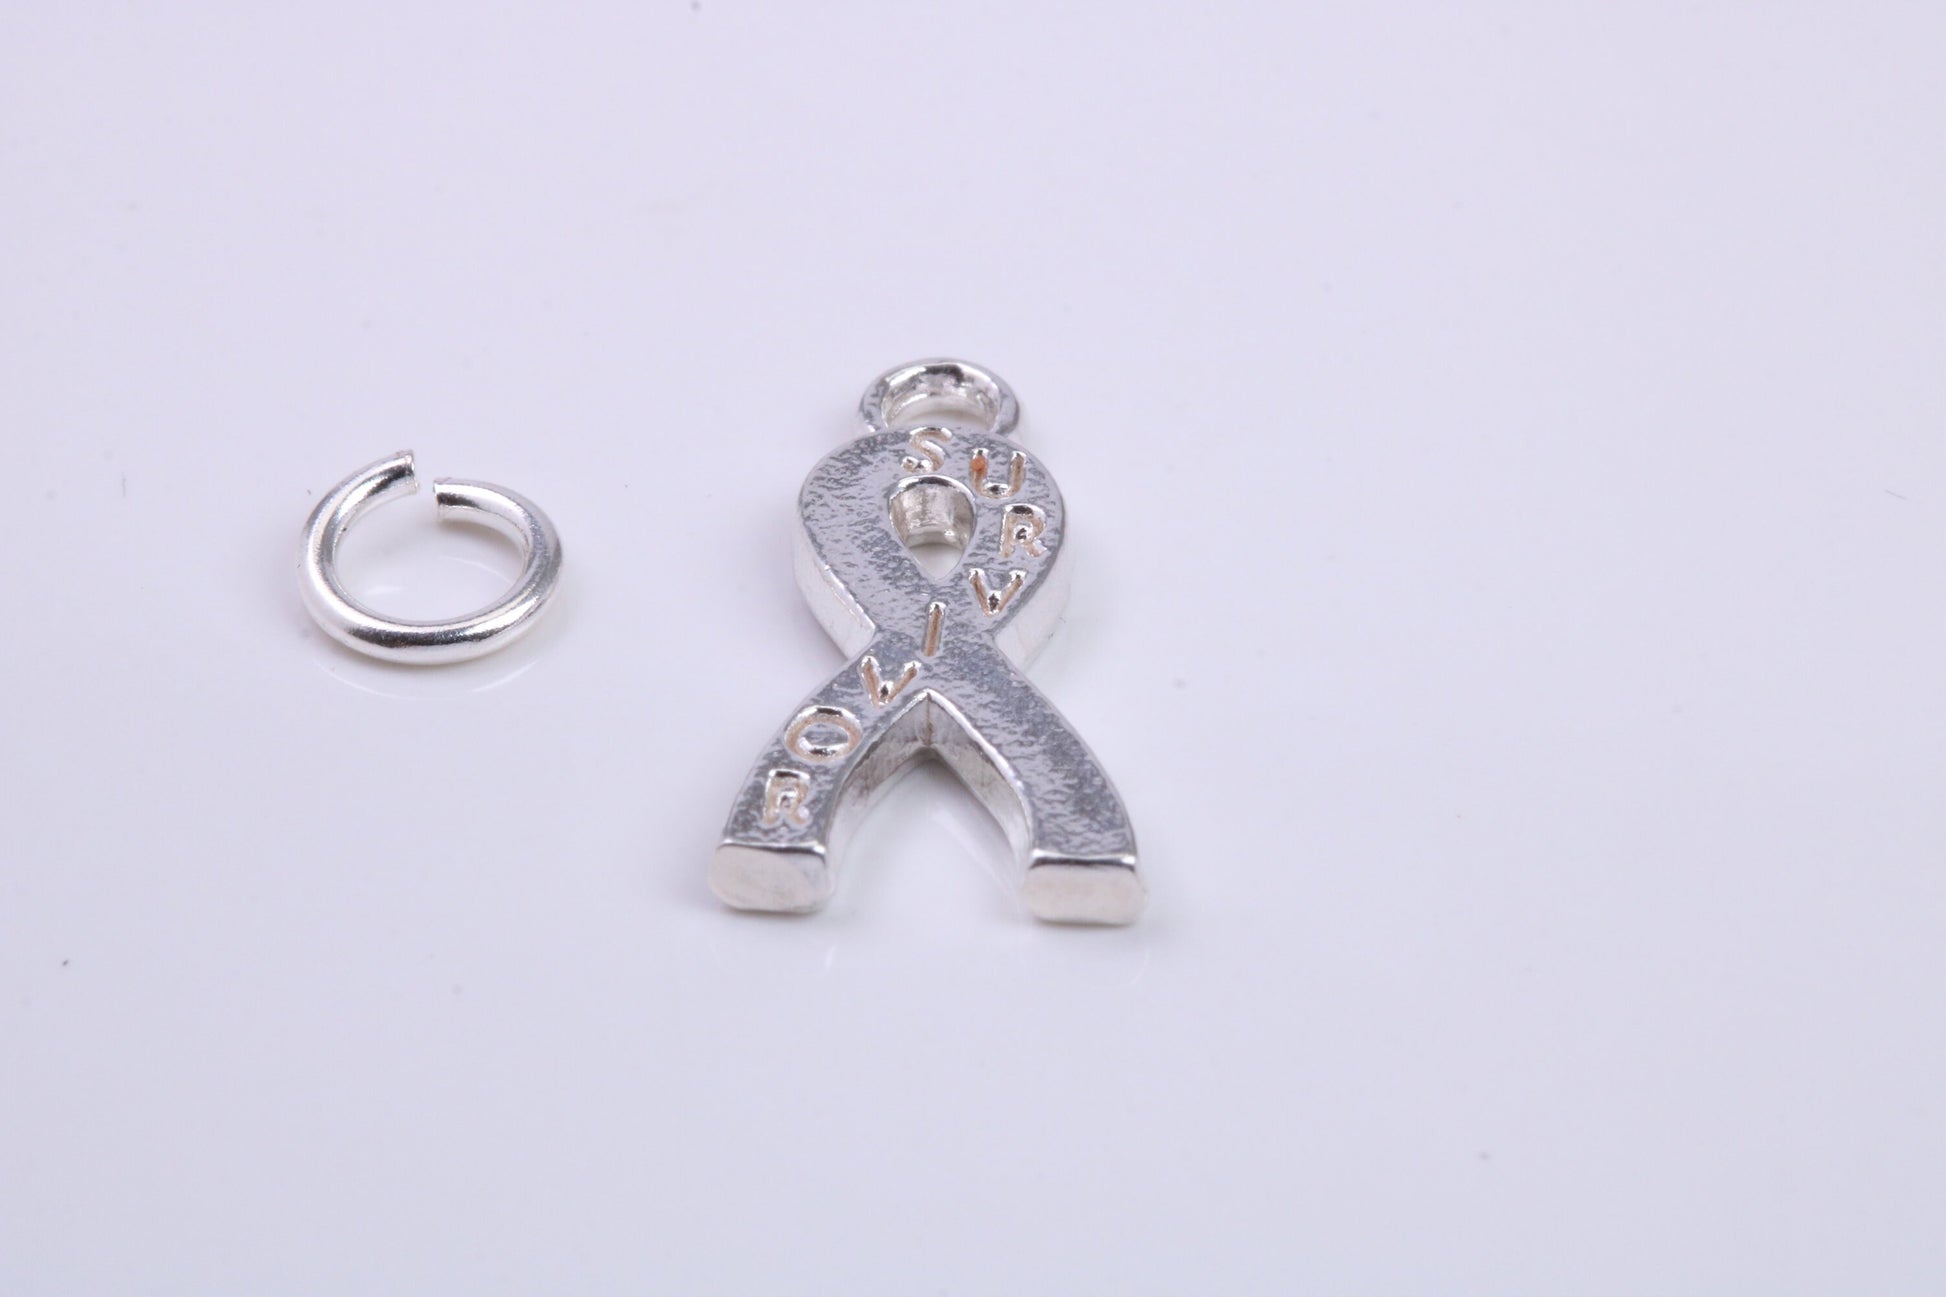 Survivor Charm, Traditional Charm, Made from Solid 925 Grade Sterling Silver, Complete with Attachment Link